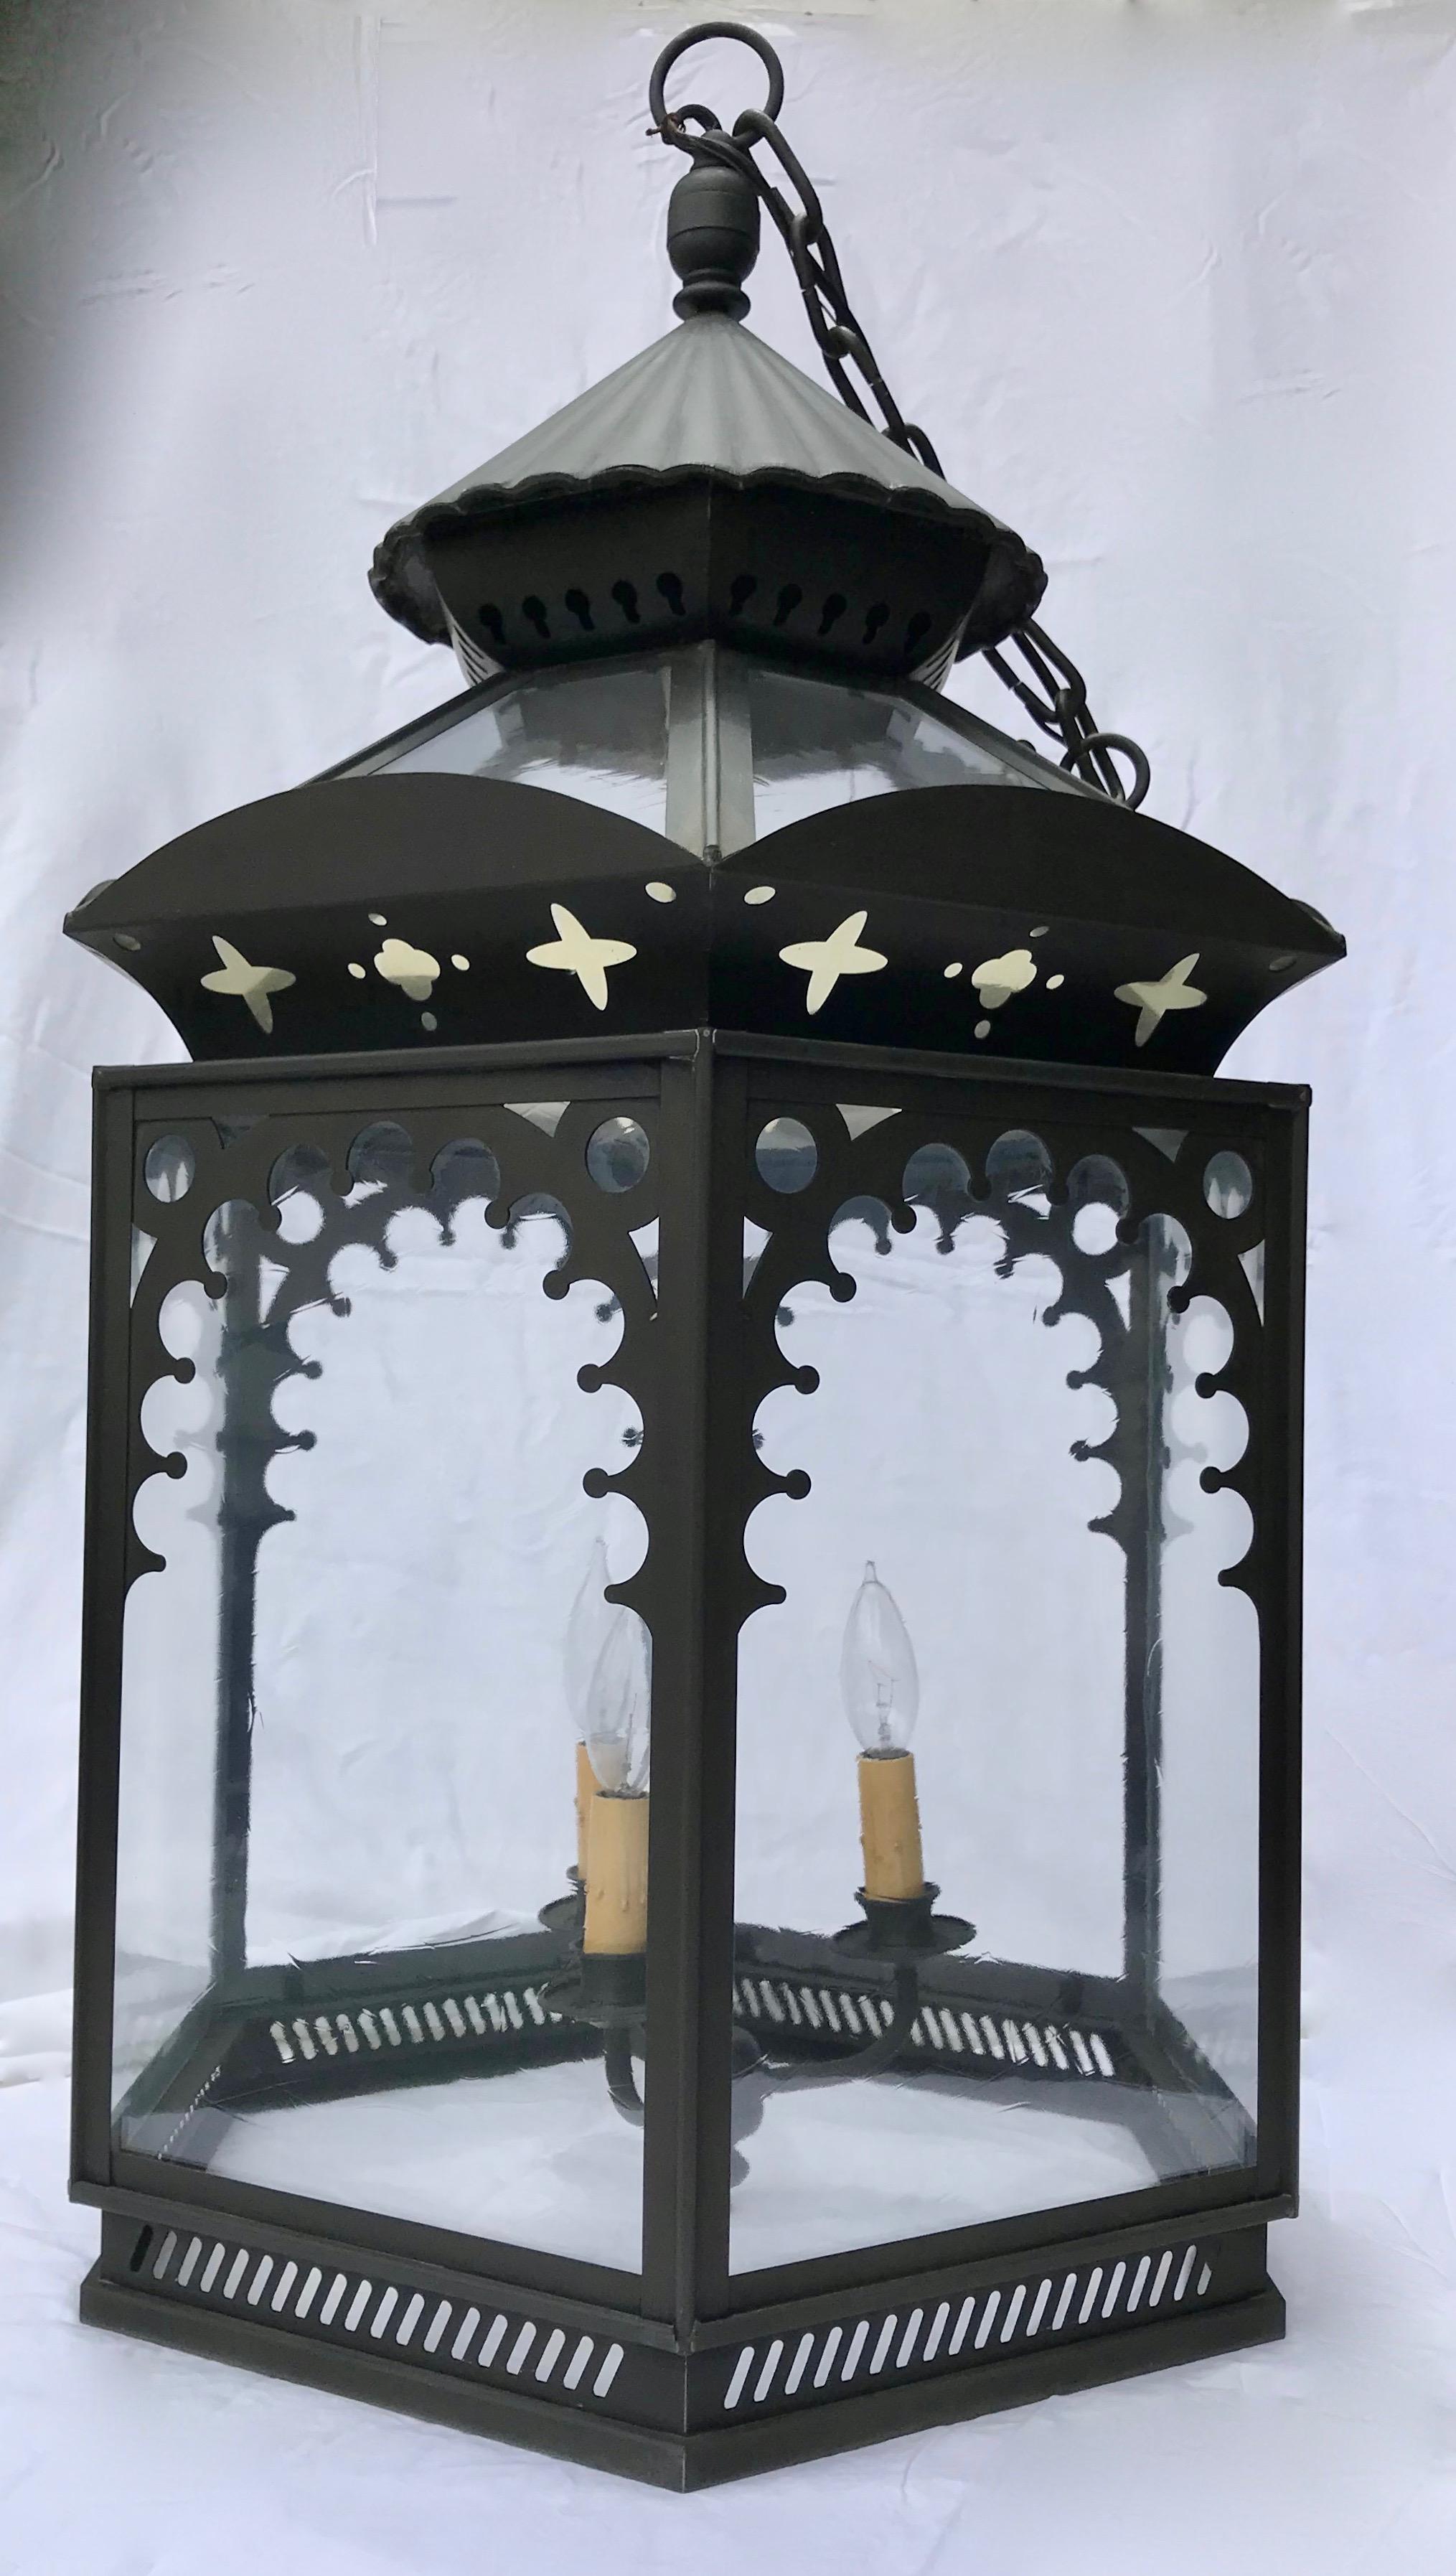 A very handsome pendant style lantern in Moroccan Moorish style - The subtle influences of Morocco are a compliment to many style homes, perfectly suited for an entry or focal point of a large room, den or even game room. The piece is ready to be